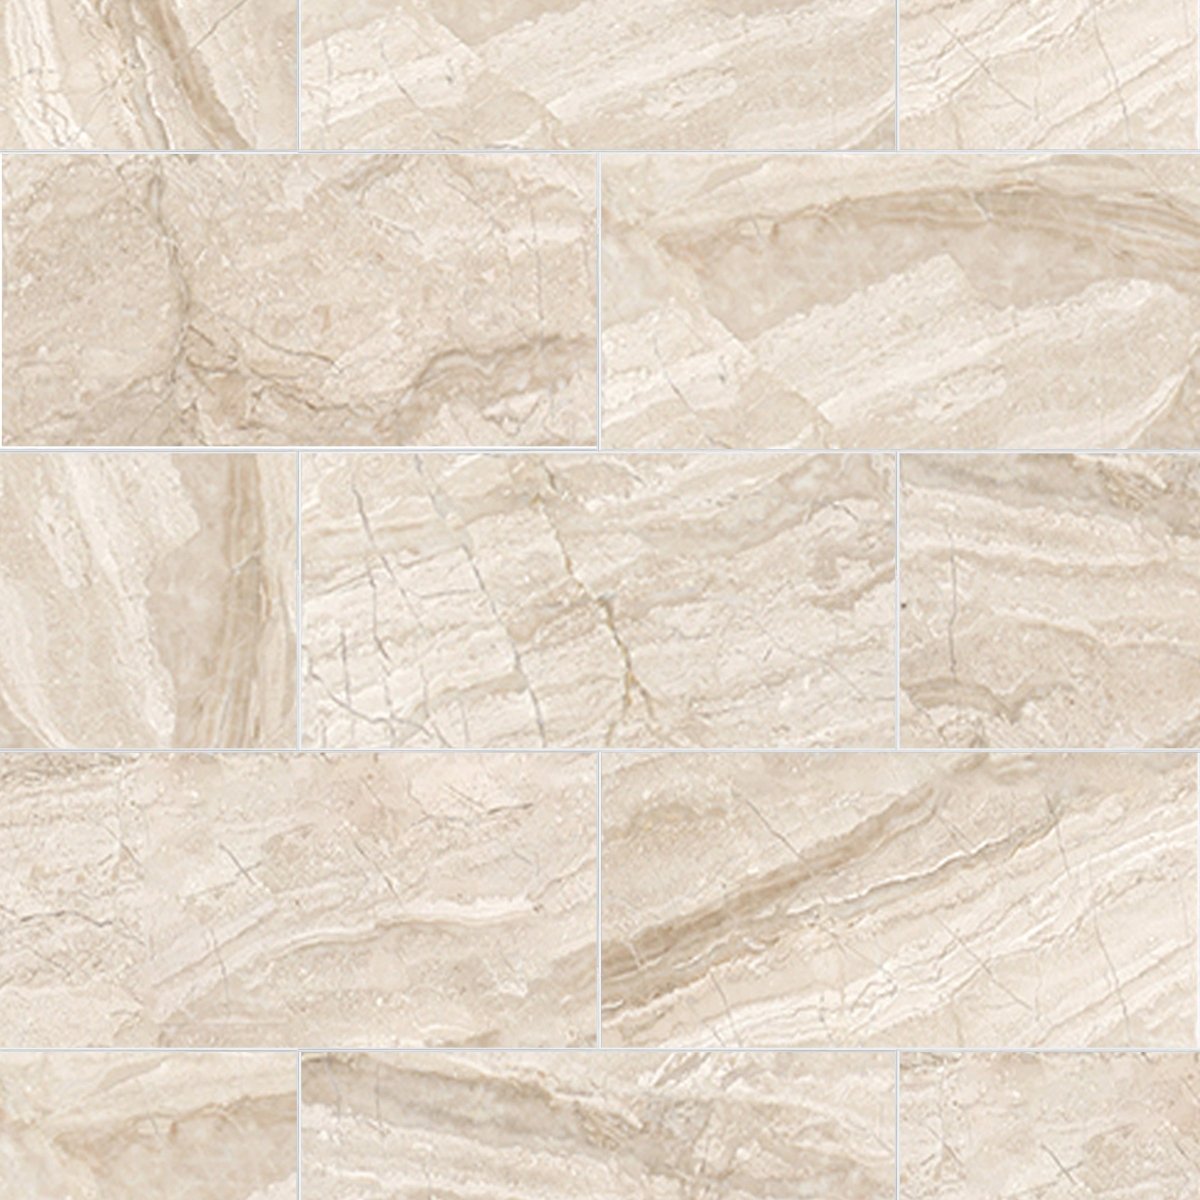 Diano Royale Polished Marble Field Tile 6''x12''x3/8''